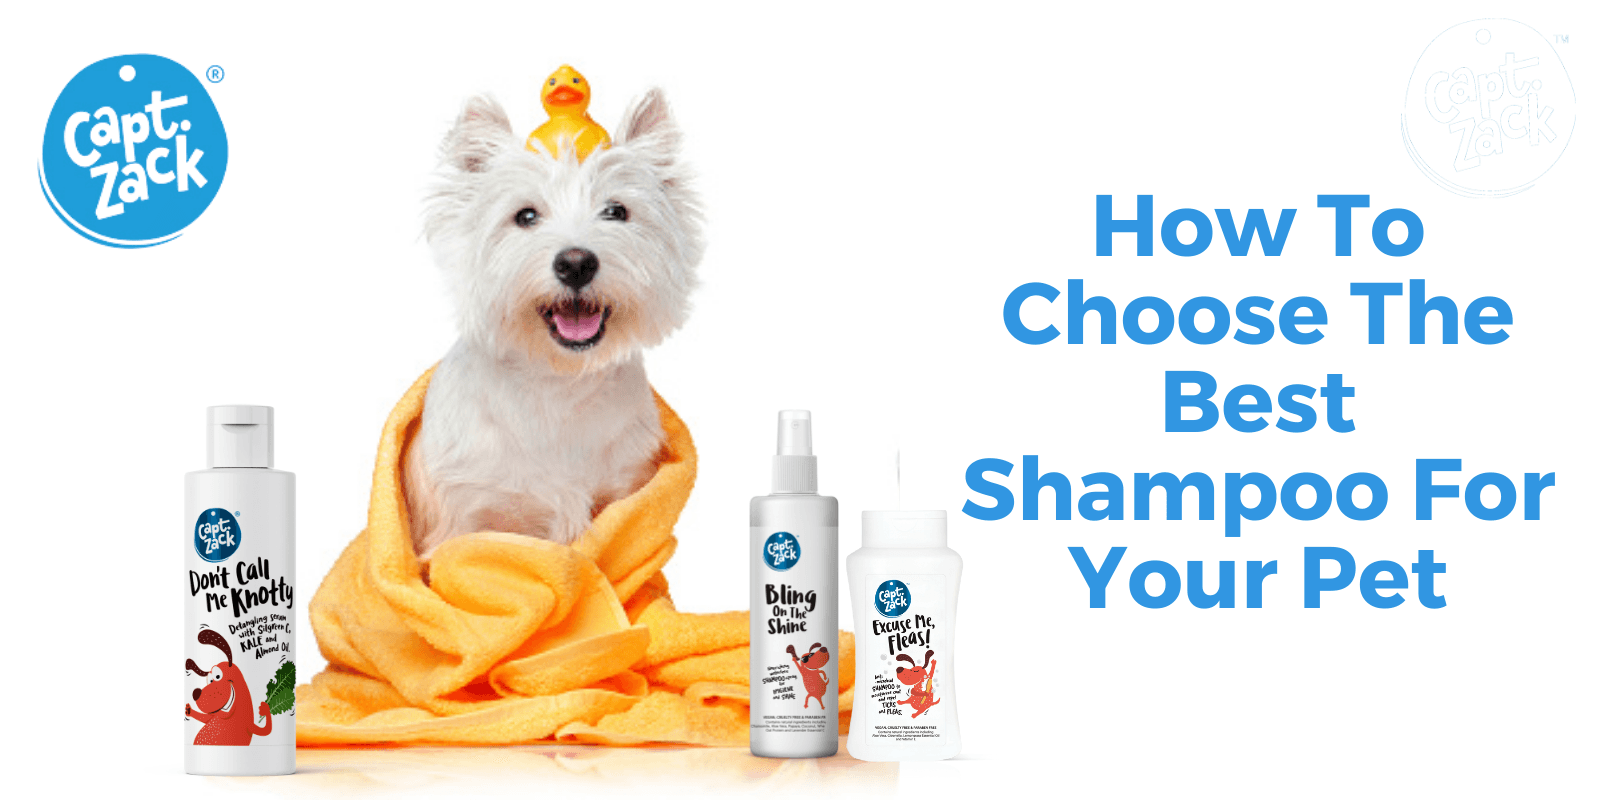 How To Choose The Best Shampoo For Your Pet